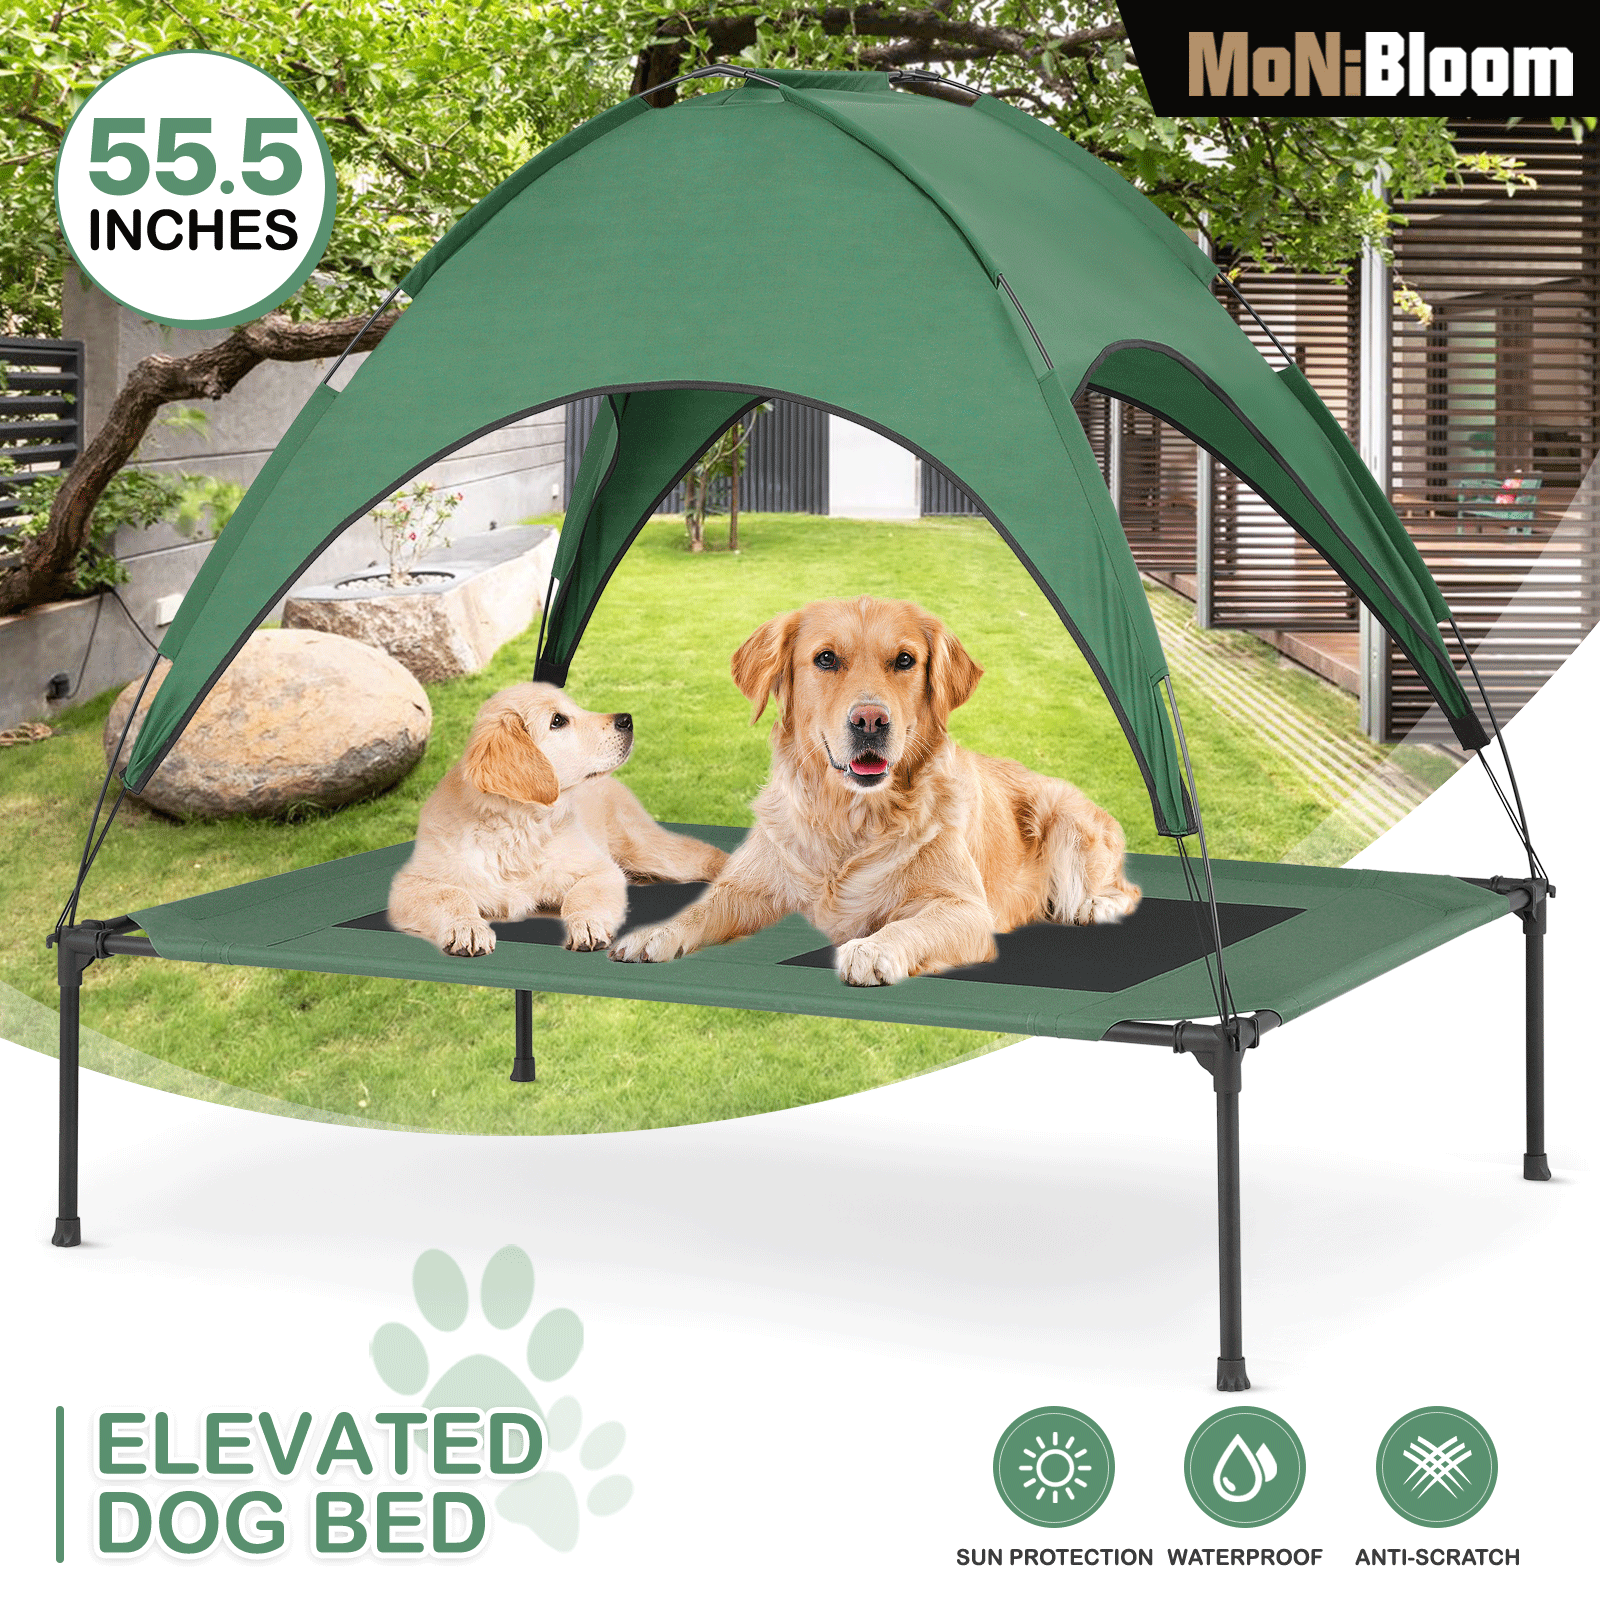 

Elevated Dog Bed With Removable Canopy, 2-in-1 Indoor/outdoor Oxford Dog Cot With Canopy Shade For Dog And Cat, Cooling Dog Bed With Tent For Camping Or Beach, 55.5 Inch Length For Extra Large Dogs